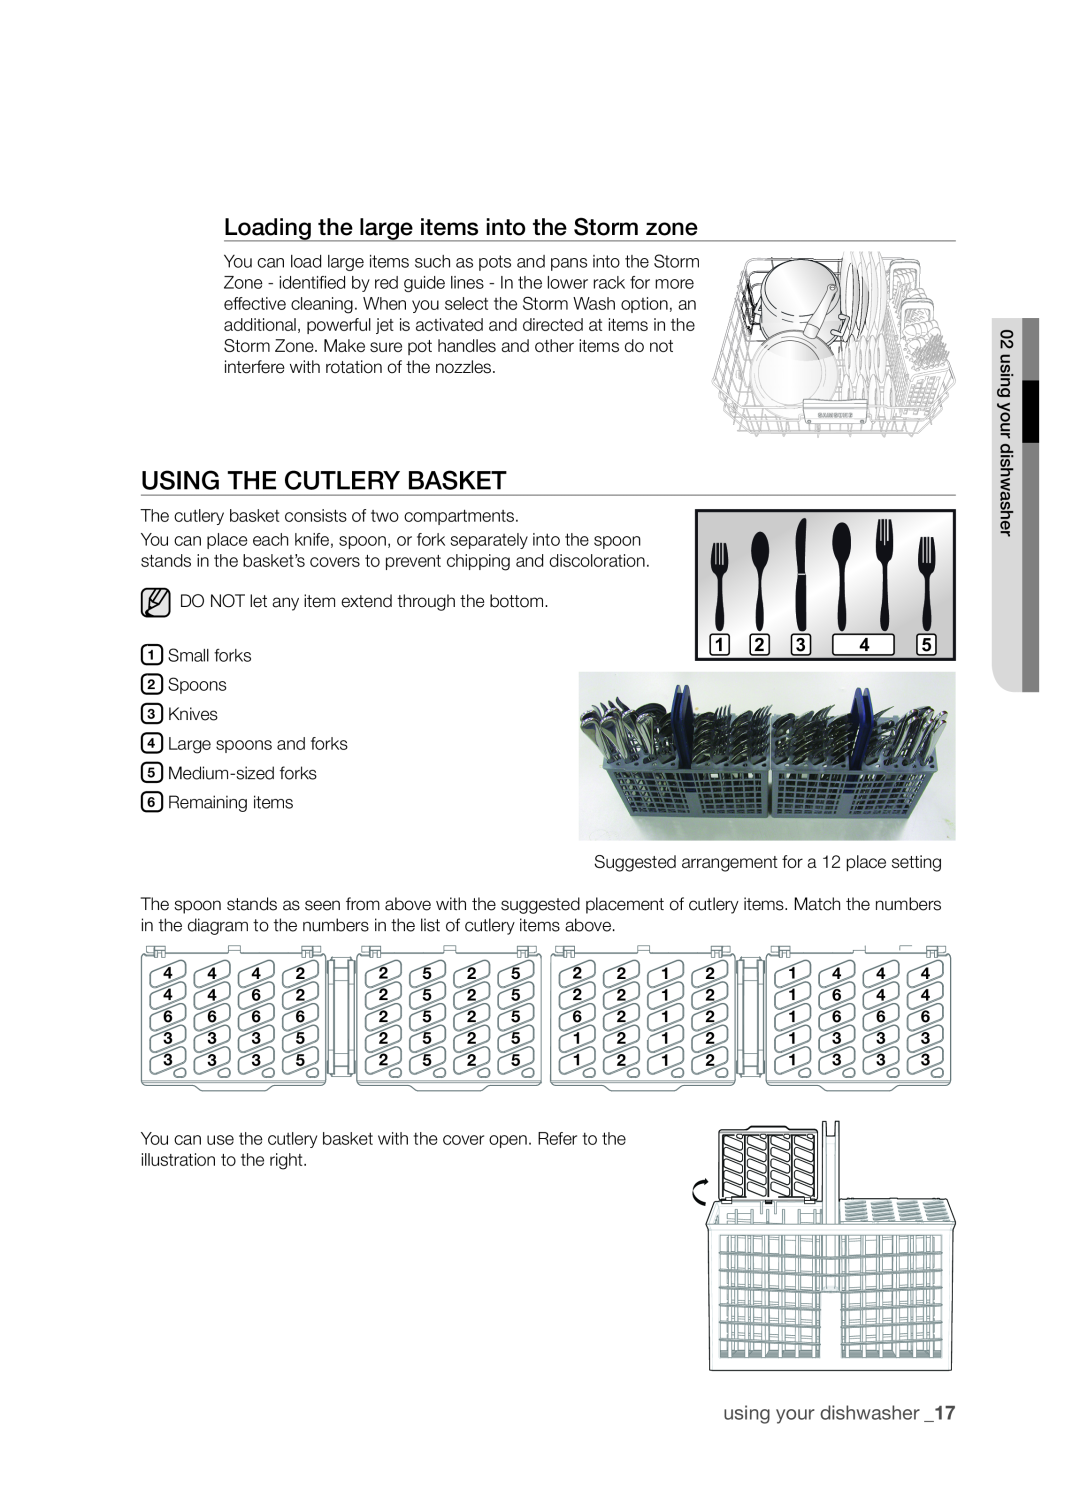 Samsung DMT800 Series manual Using the cutlery basket, Loading the large items into the Storm zone, using your dishwasher 